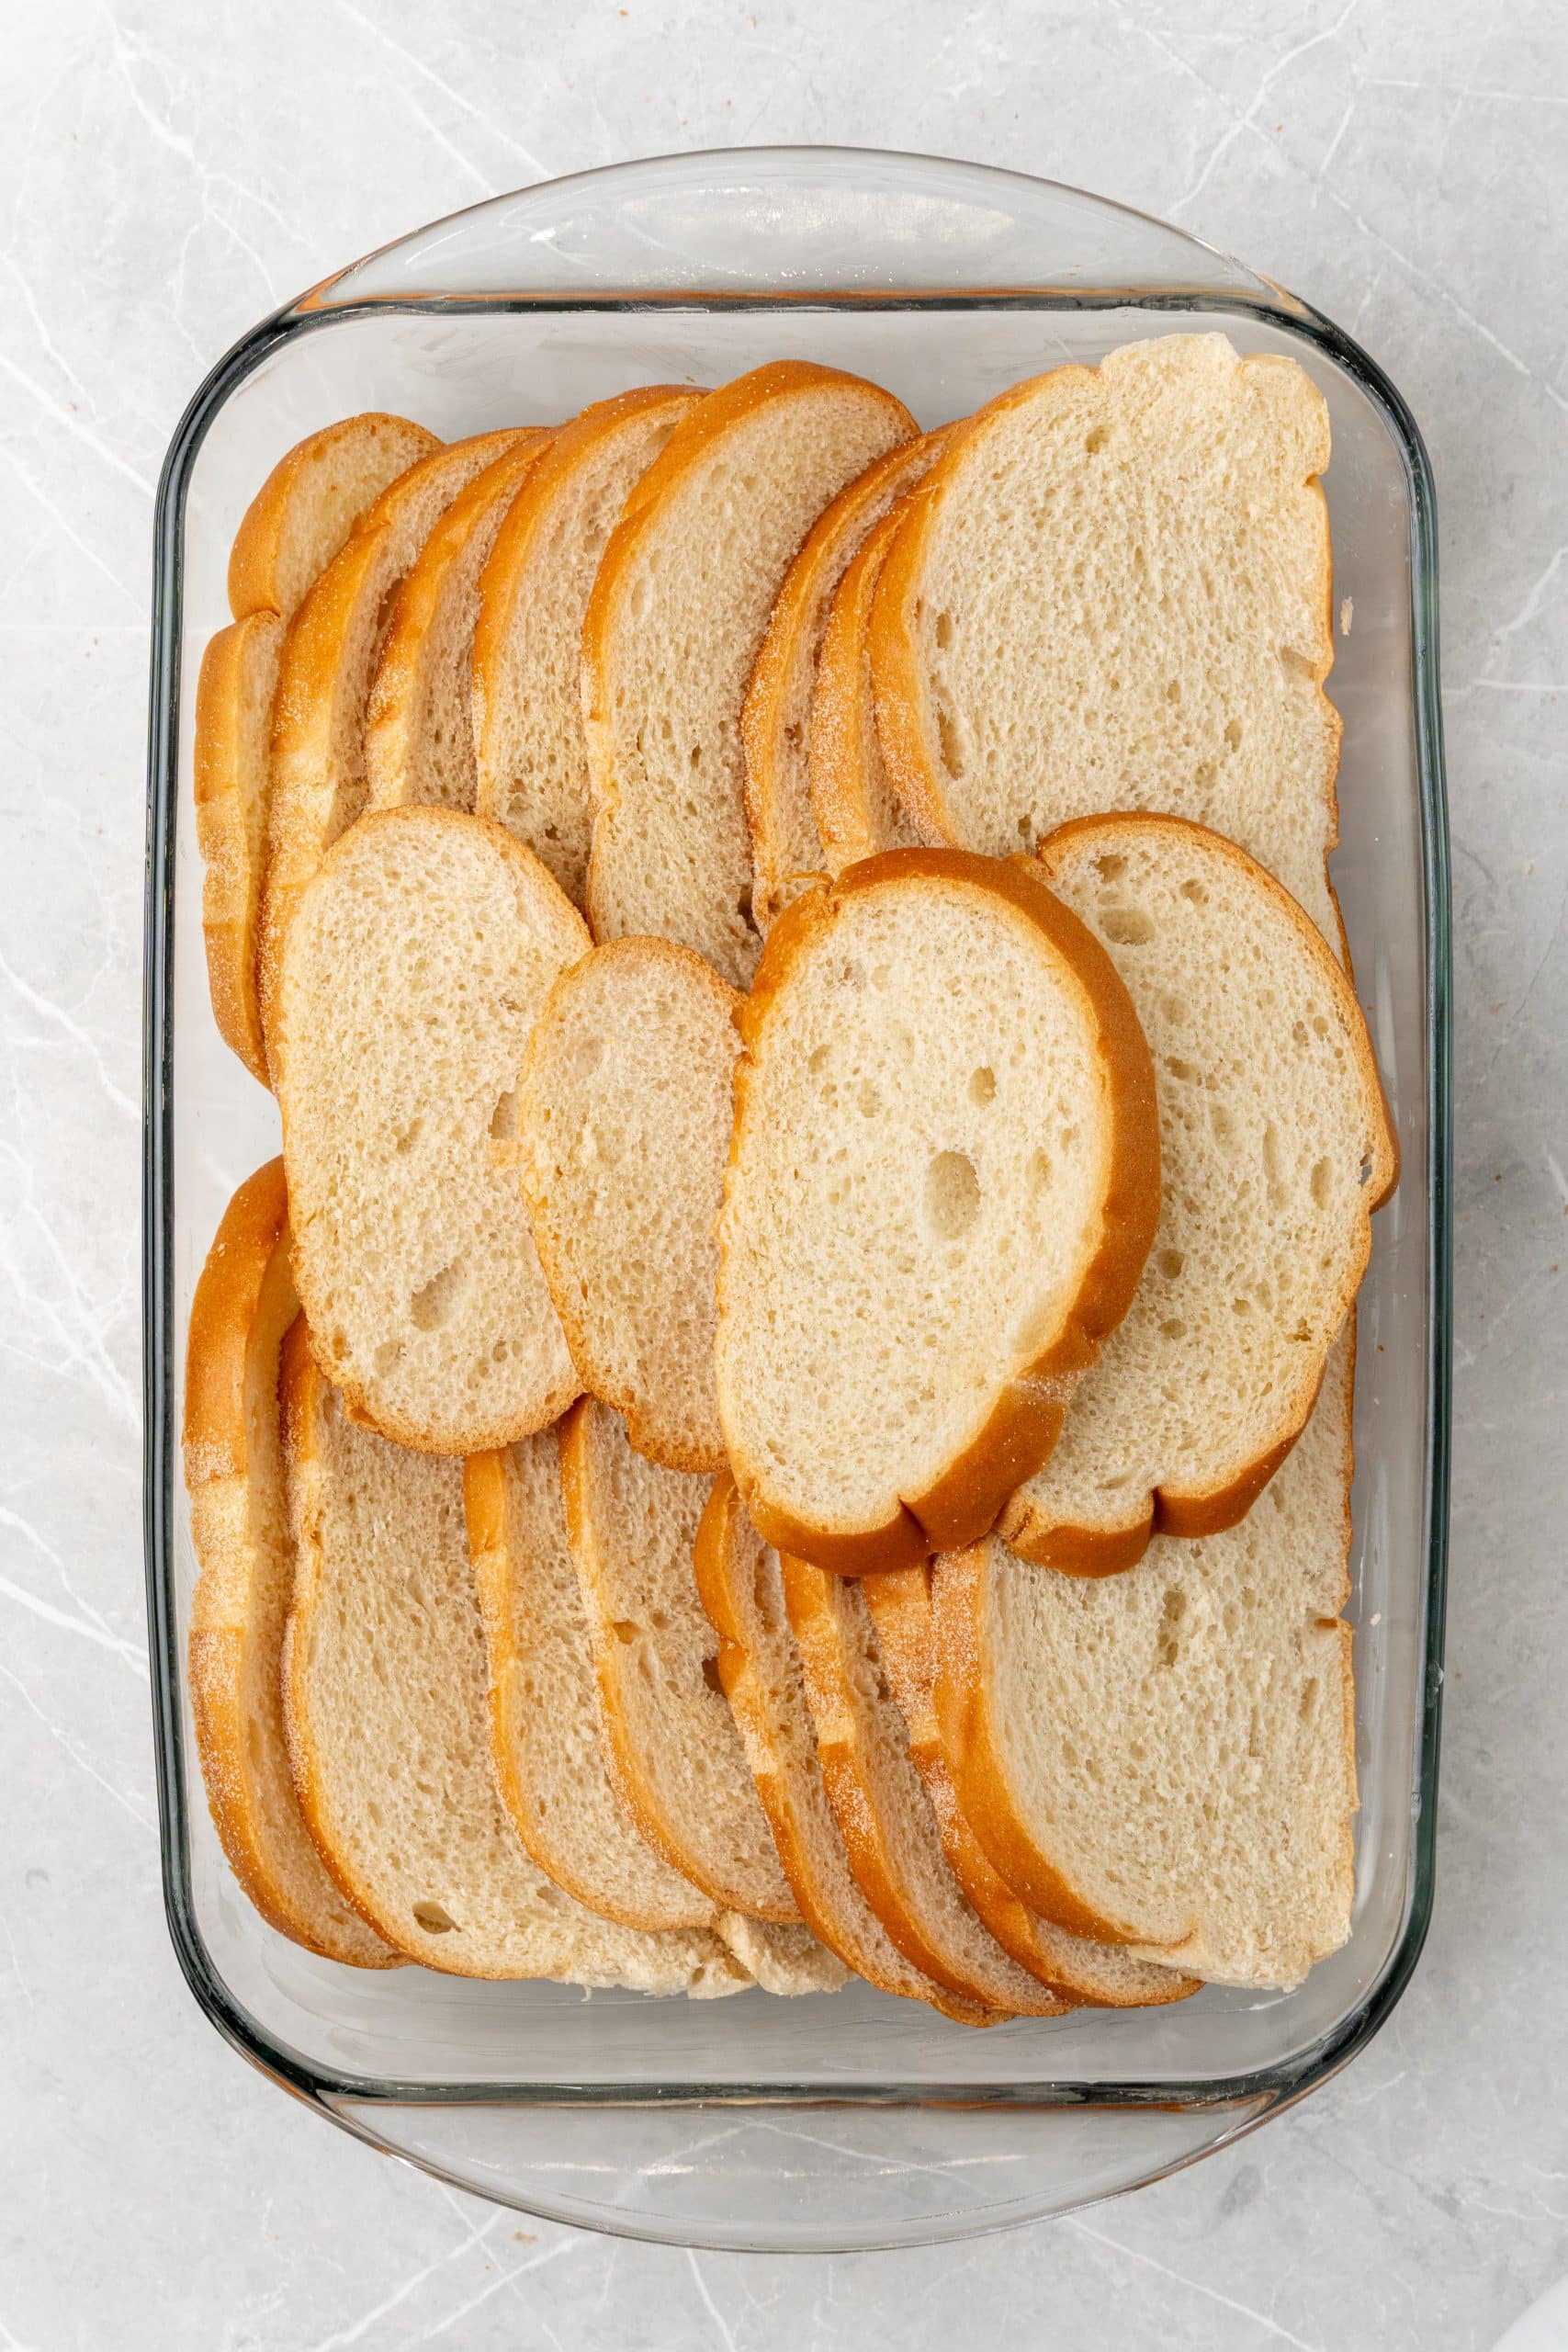 slices of bread arranged in a glass 9x13 inch baking dish